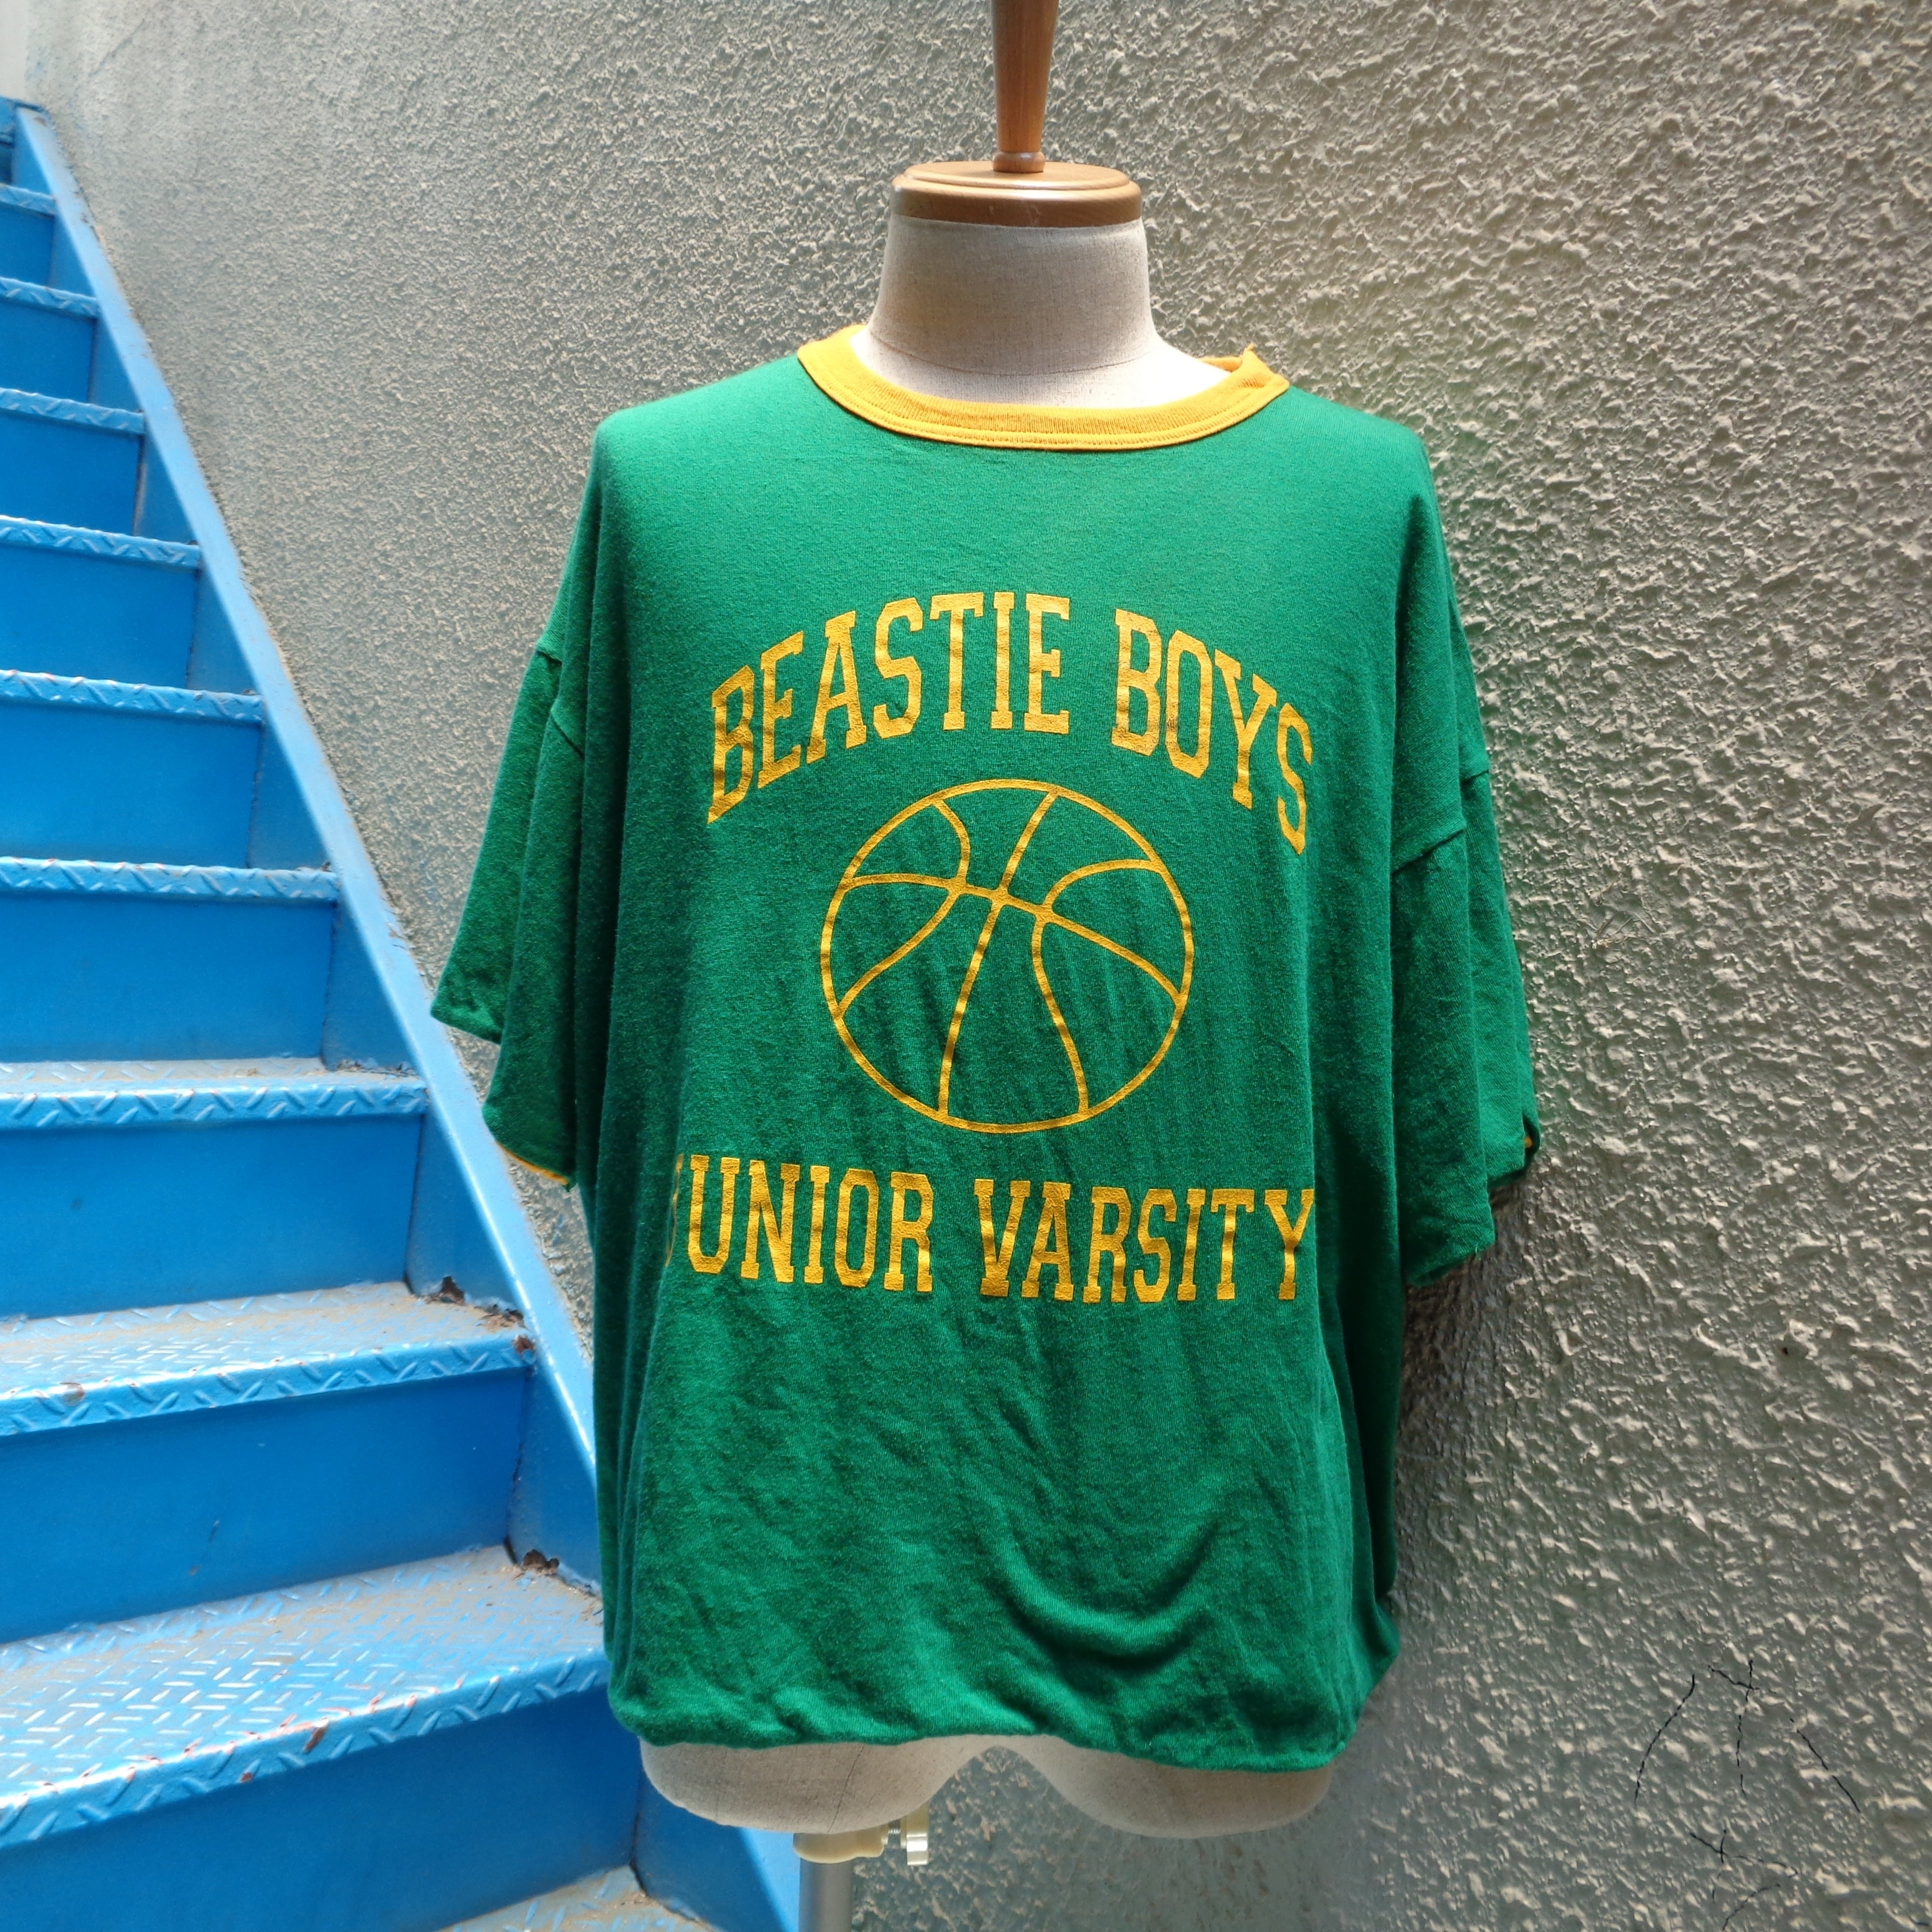 BEASTIE BOYS Reversible T-shirt／ビースティーボーイズ　リバーシブル　 Tシャツ | BIG TIME ｜ヴィンテージ  古着 BIGTIME（ビッグタイム） powered by BASE